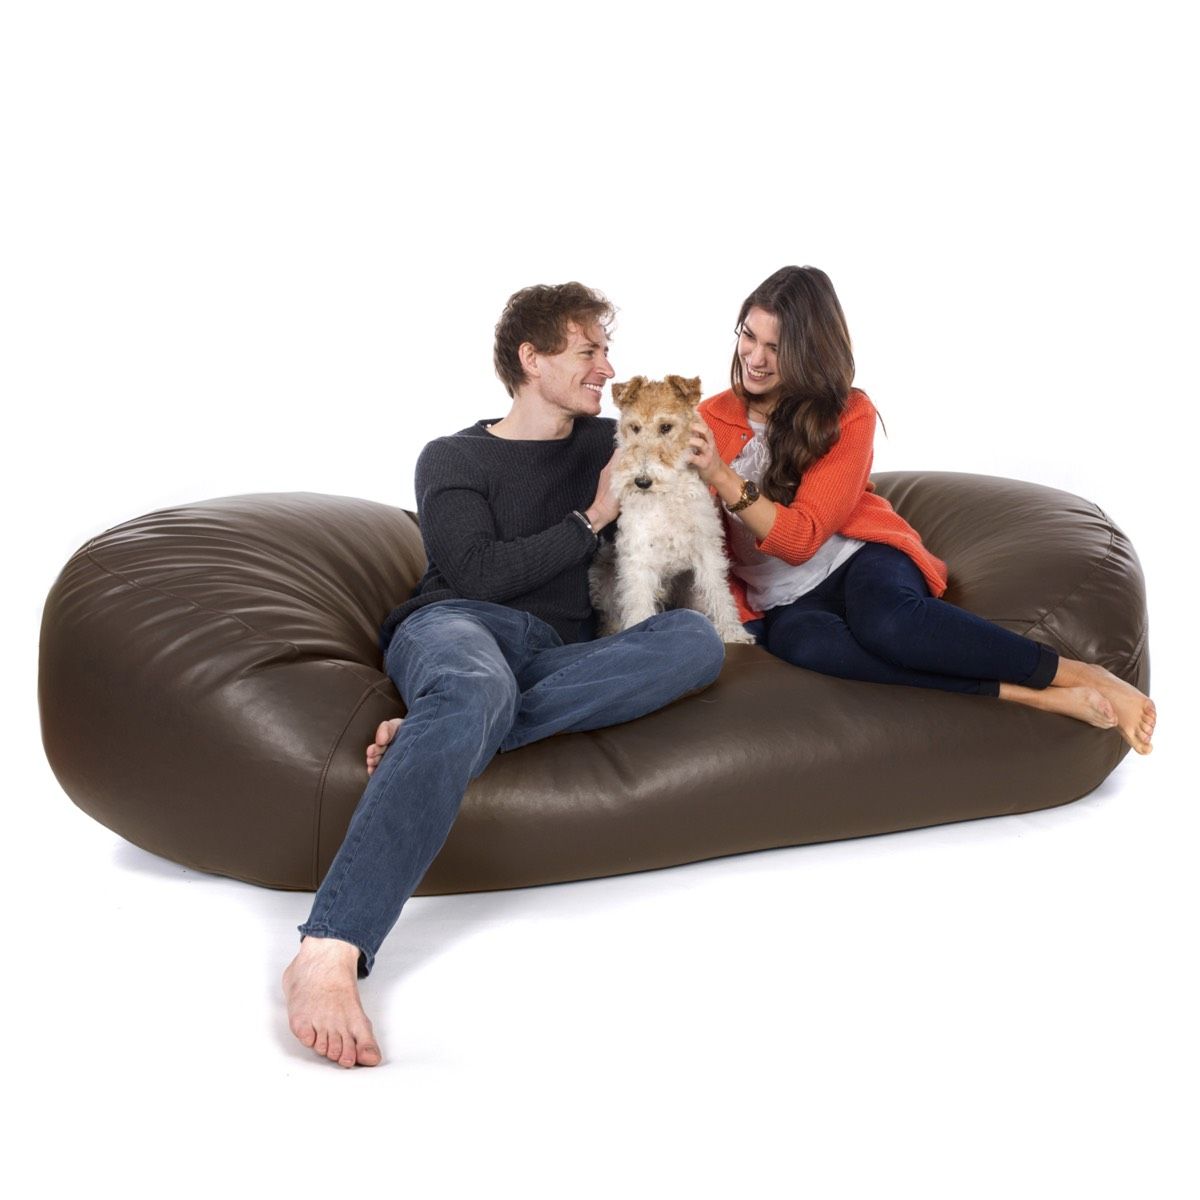 Mua 7FT Giant Fur Bean Bag Chair for Adult （no Filler） Furniture Big Round  Soft Fluffy Faux Fur BeanBag Lazy Sofa Bed Cover(it was only a Cover, not a  Full Bean Bag)